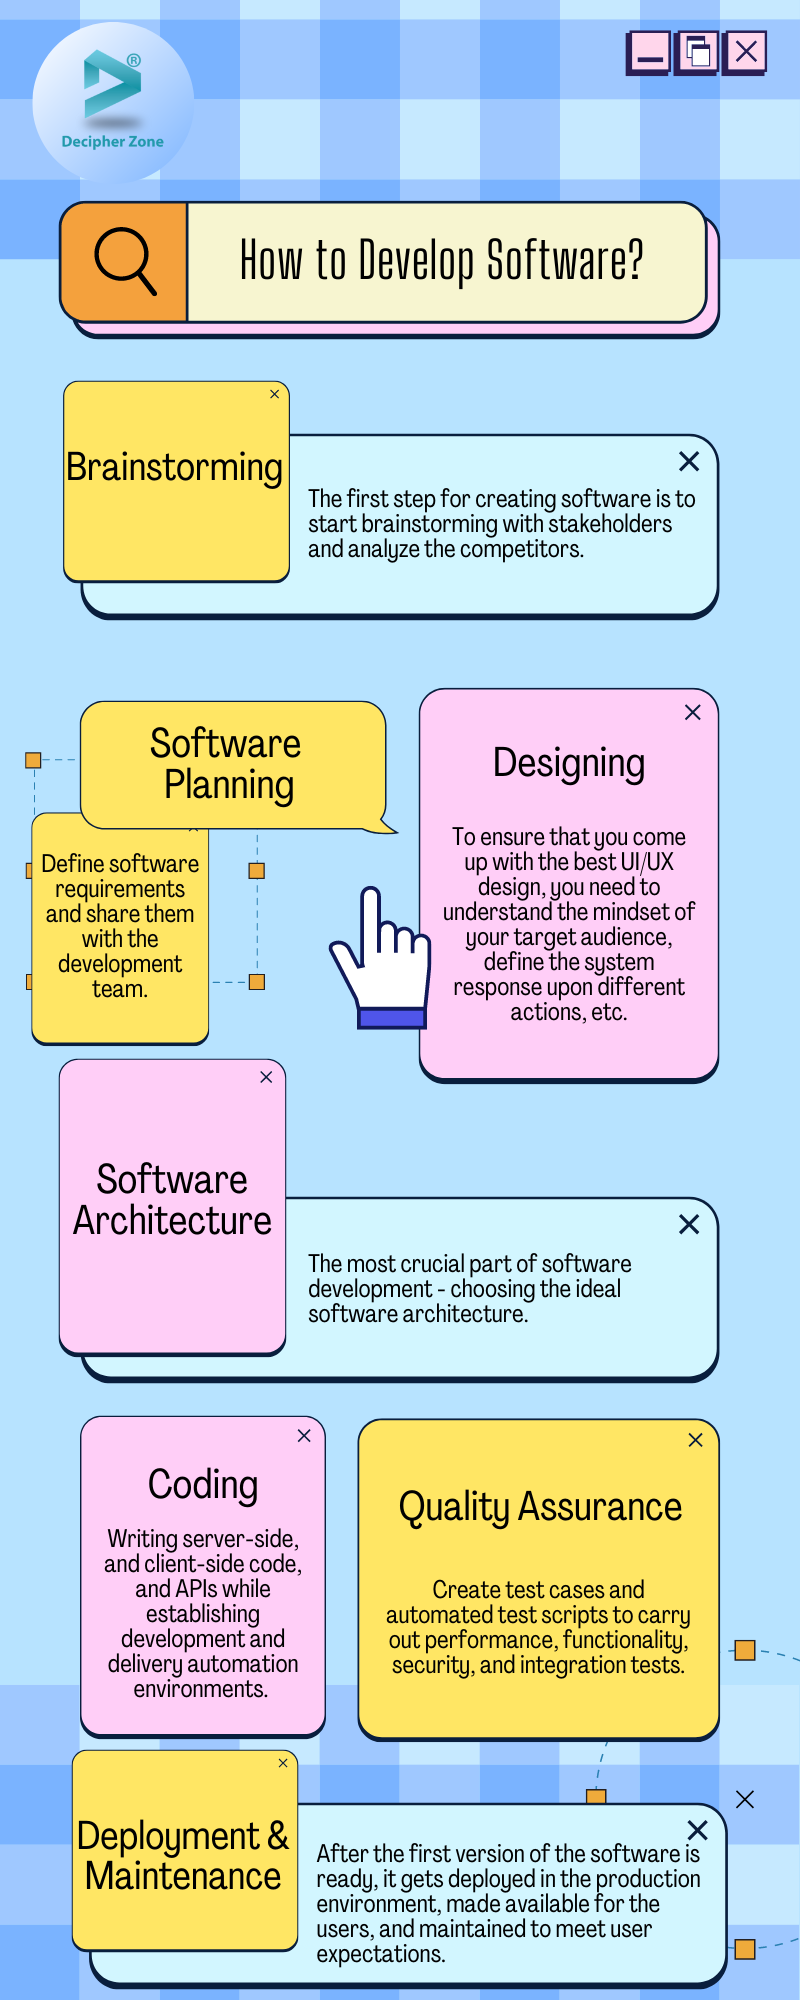 How to Develop Software from Scratch